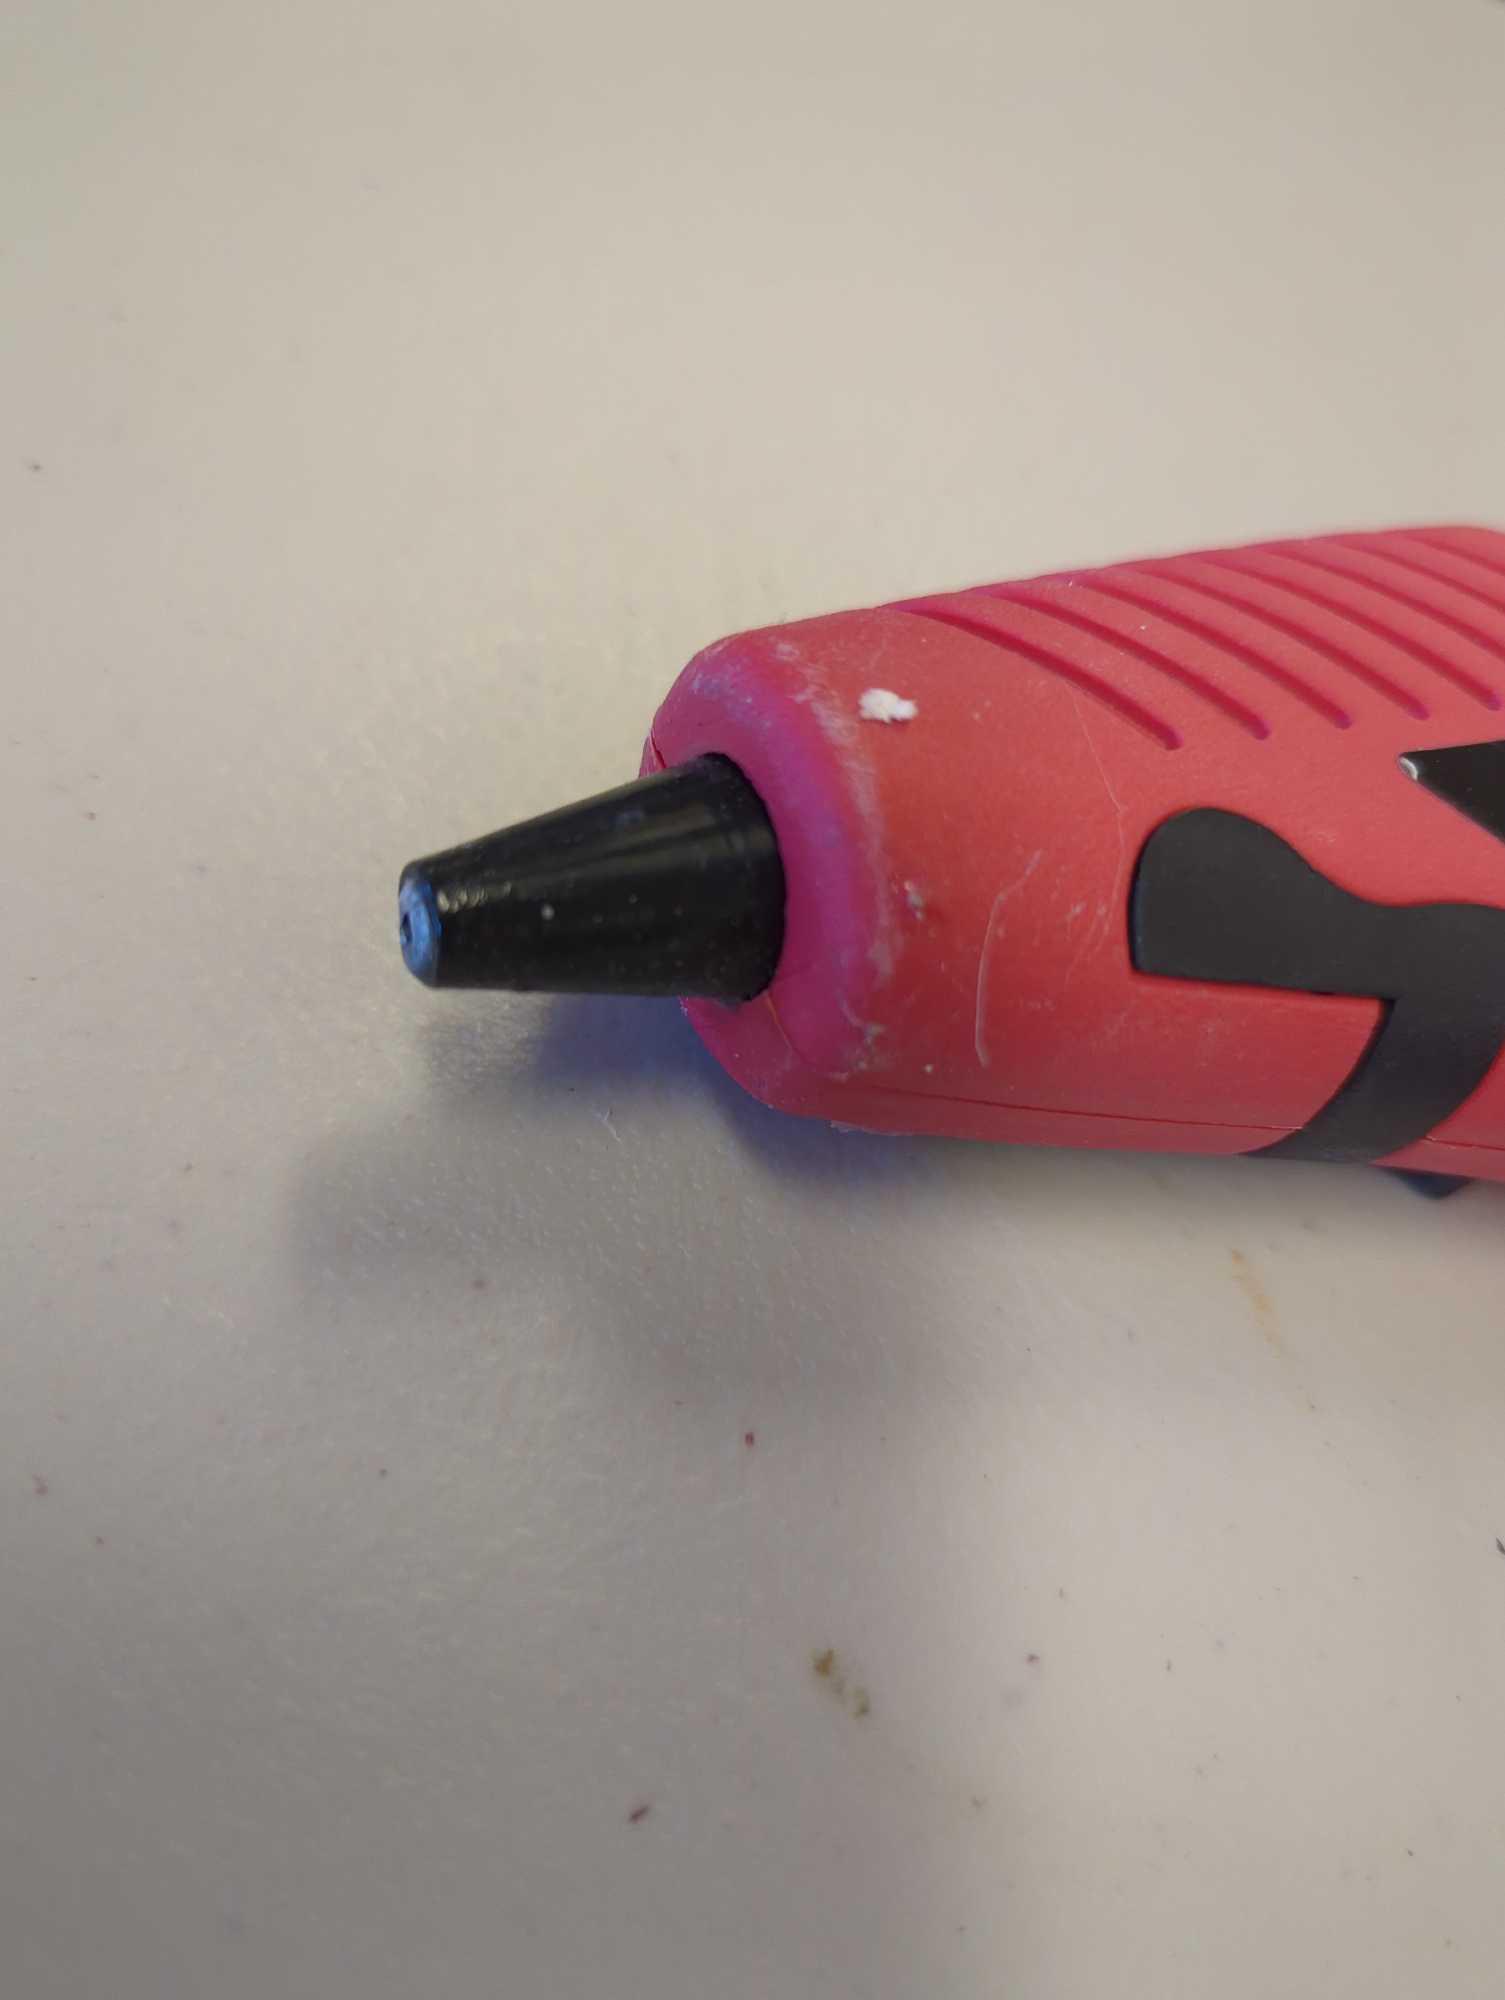 Arrow Dual Temp Glue Gun. Comes in open packaging as it's shown in photos. Appears to be used and